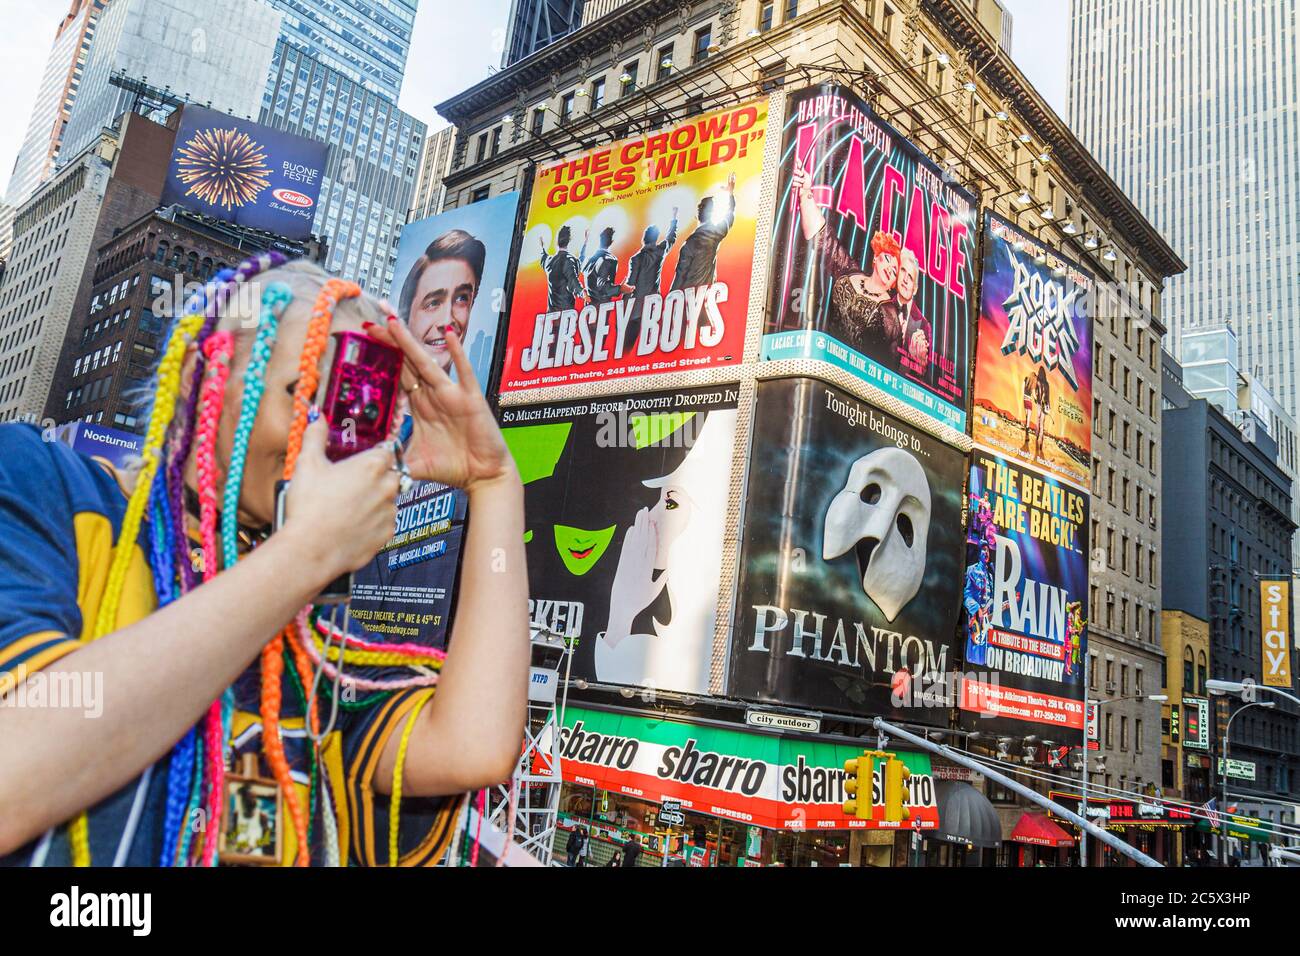 New York,New York City,NYC,Midtown,Manhattan,Times Square,Theatre District,Broadway,illuminated sign,spectaculars,ad advertising advertisement,Wicked, Stock Photo